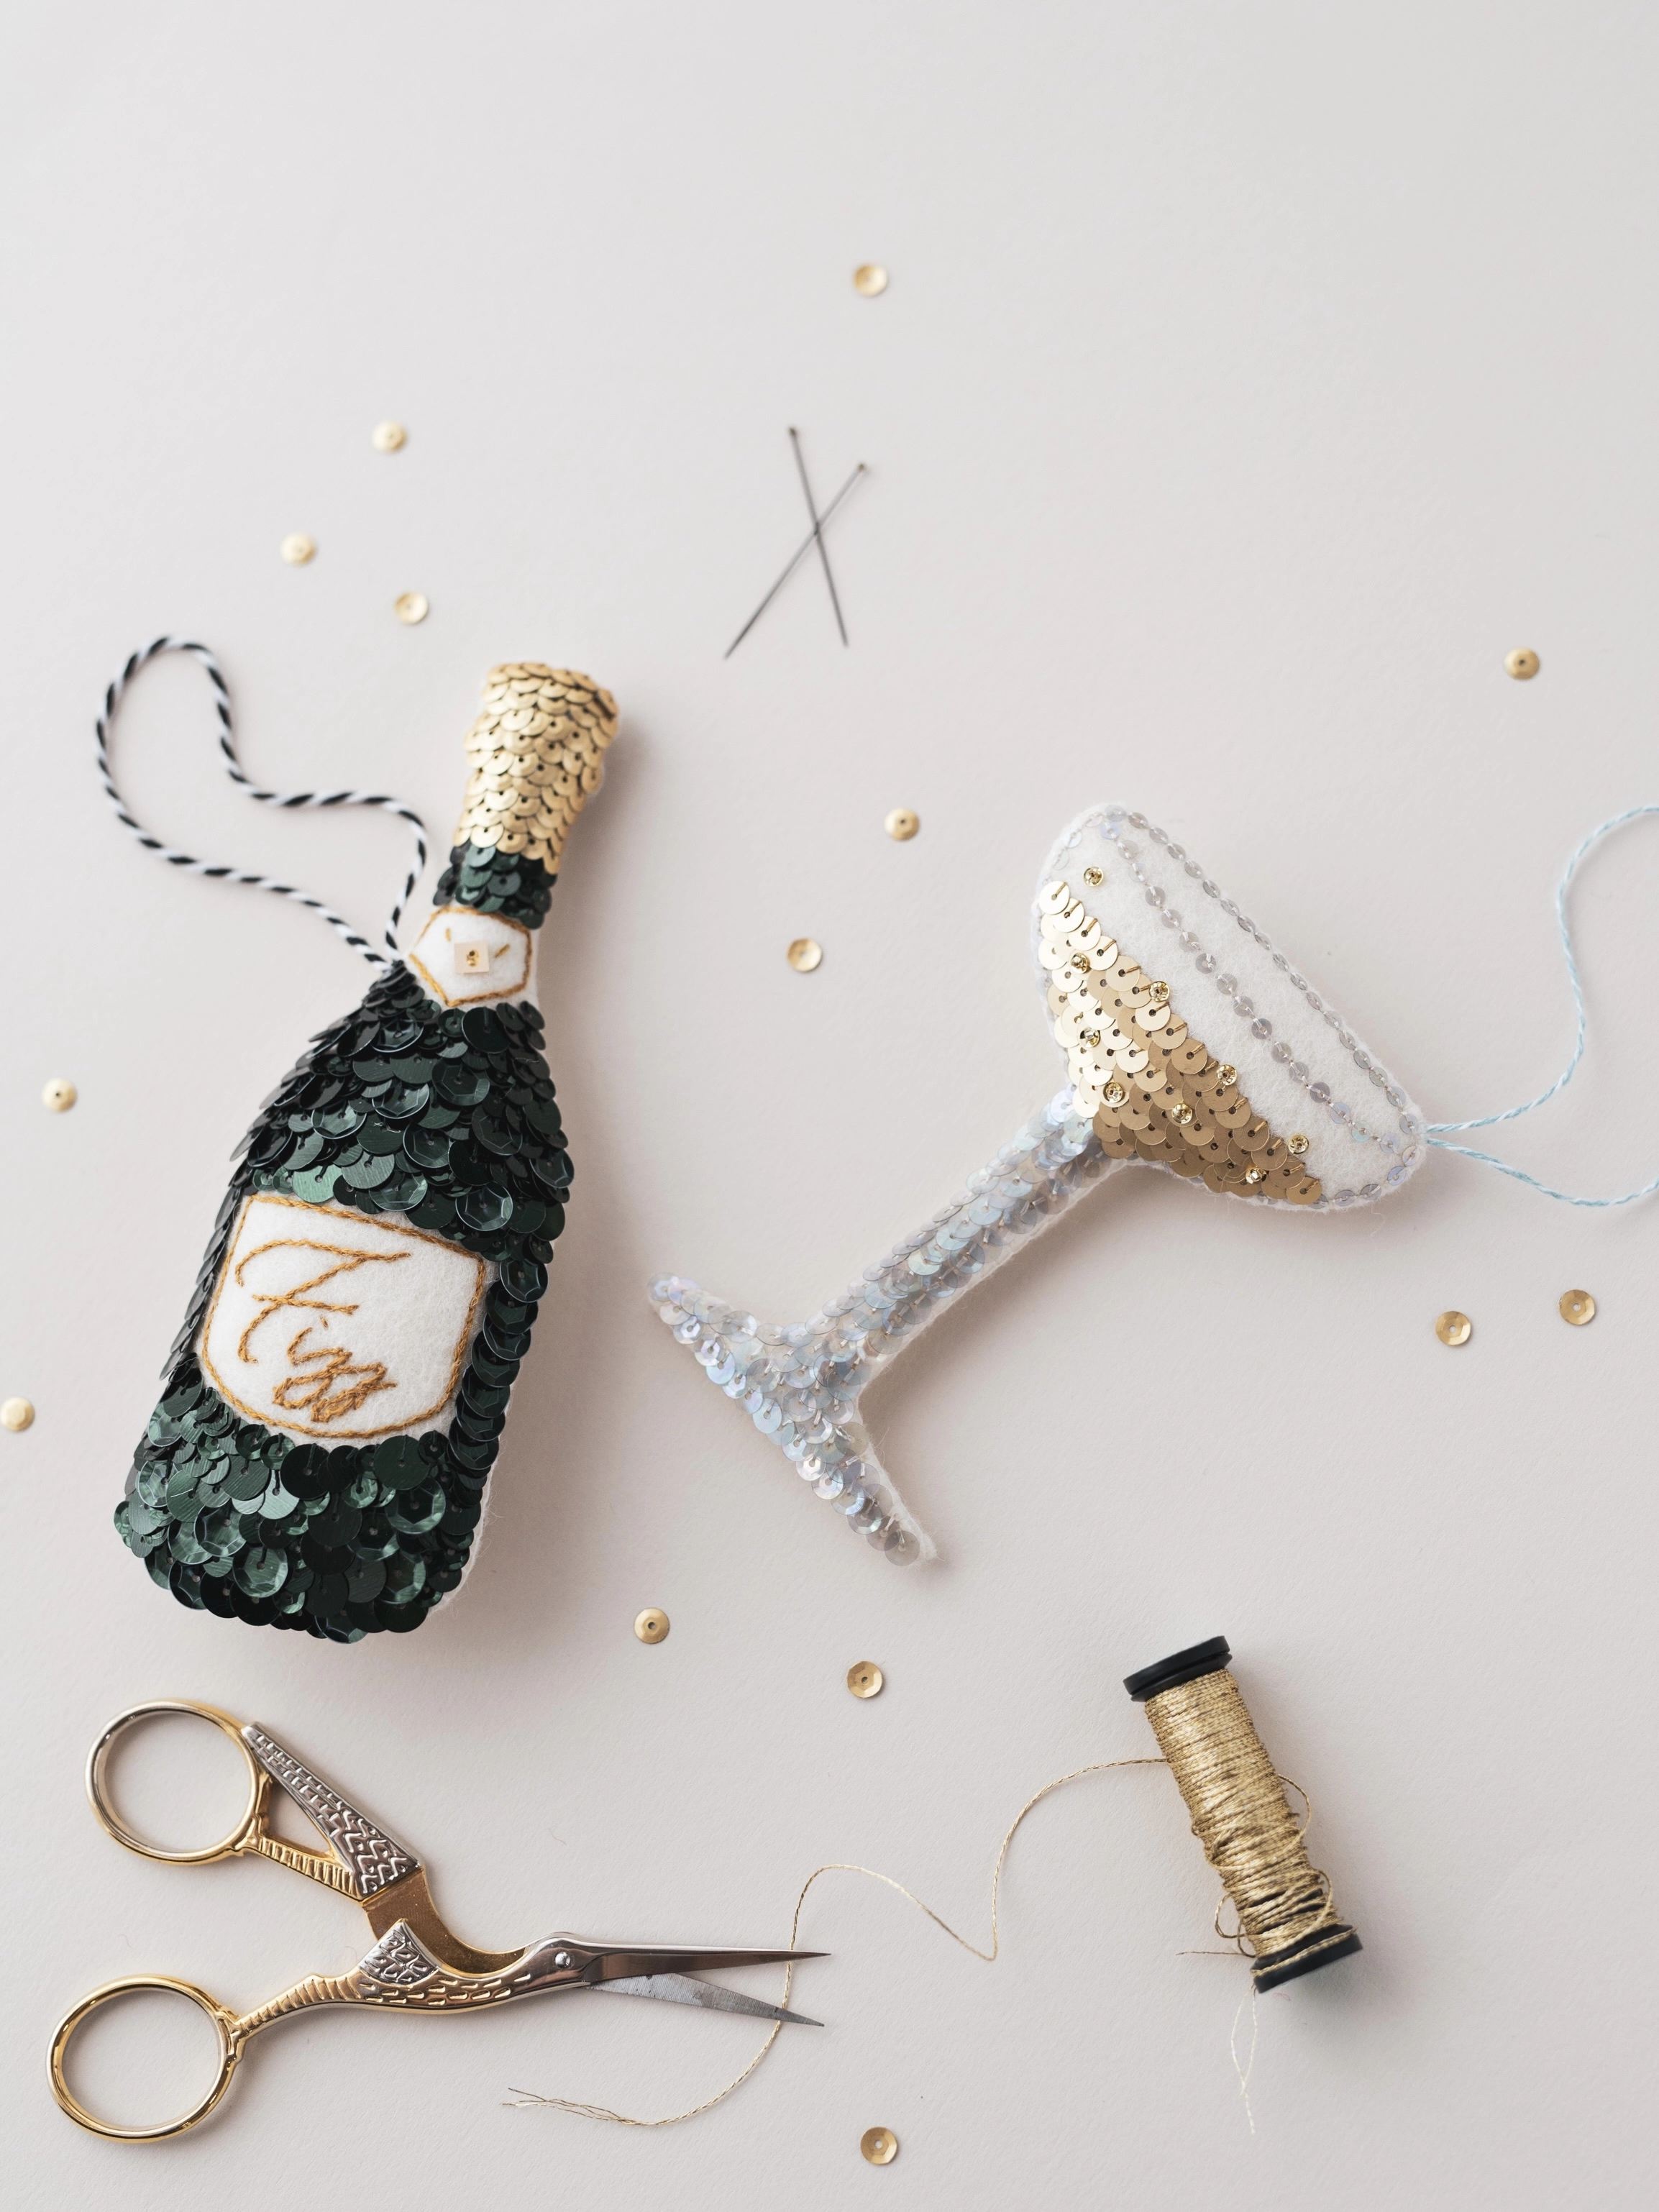 a sequinned green champagne bottle ornament and golden sequinned champagne coupe glass ornament on a white table